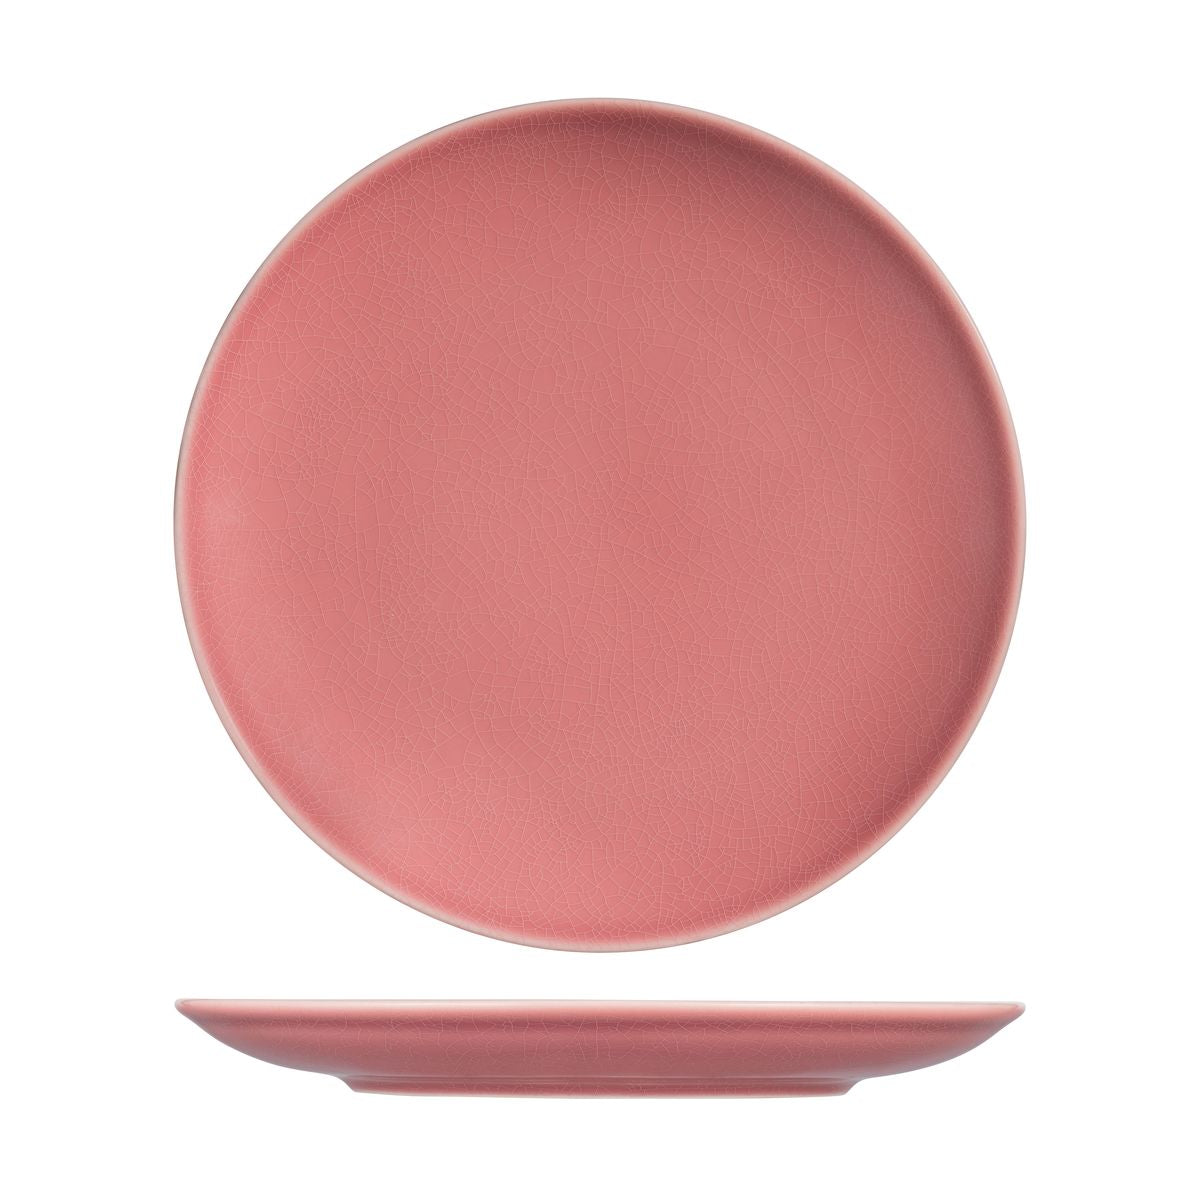 Round Coupe Plate - Pink, 310Mm, Vintage from Rak Porcelain. made out of Porcelain and sold in boxes of 6. Hospitality quality at wholesale price with The Flying Fork! 